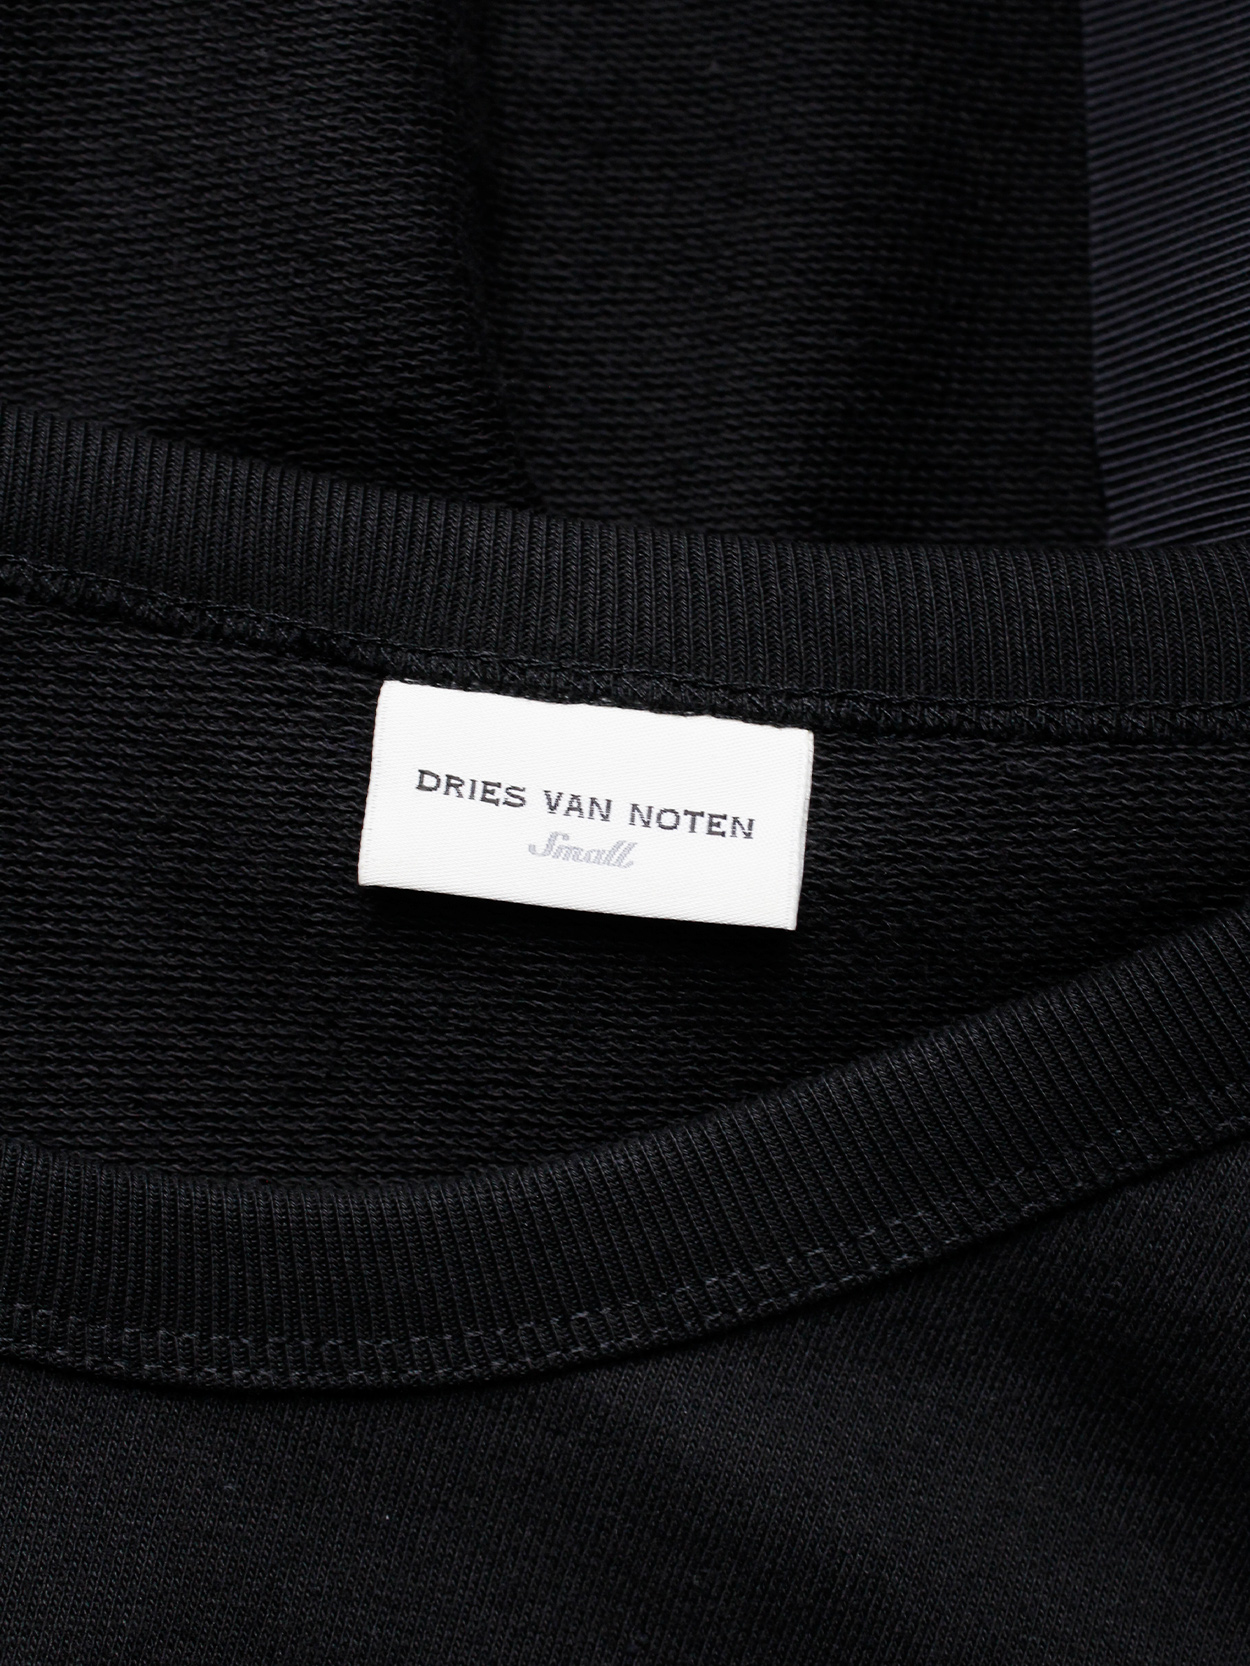 Dries Van Noten black t-shirt with white trim and open belted back - V ...